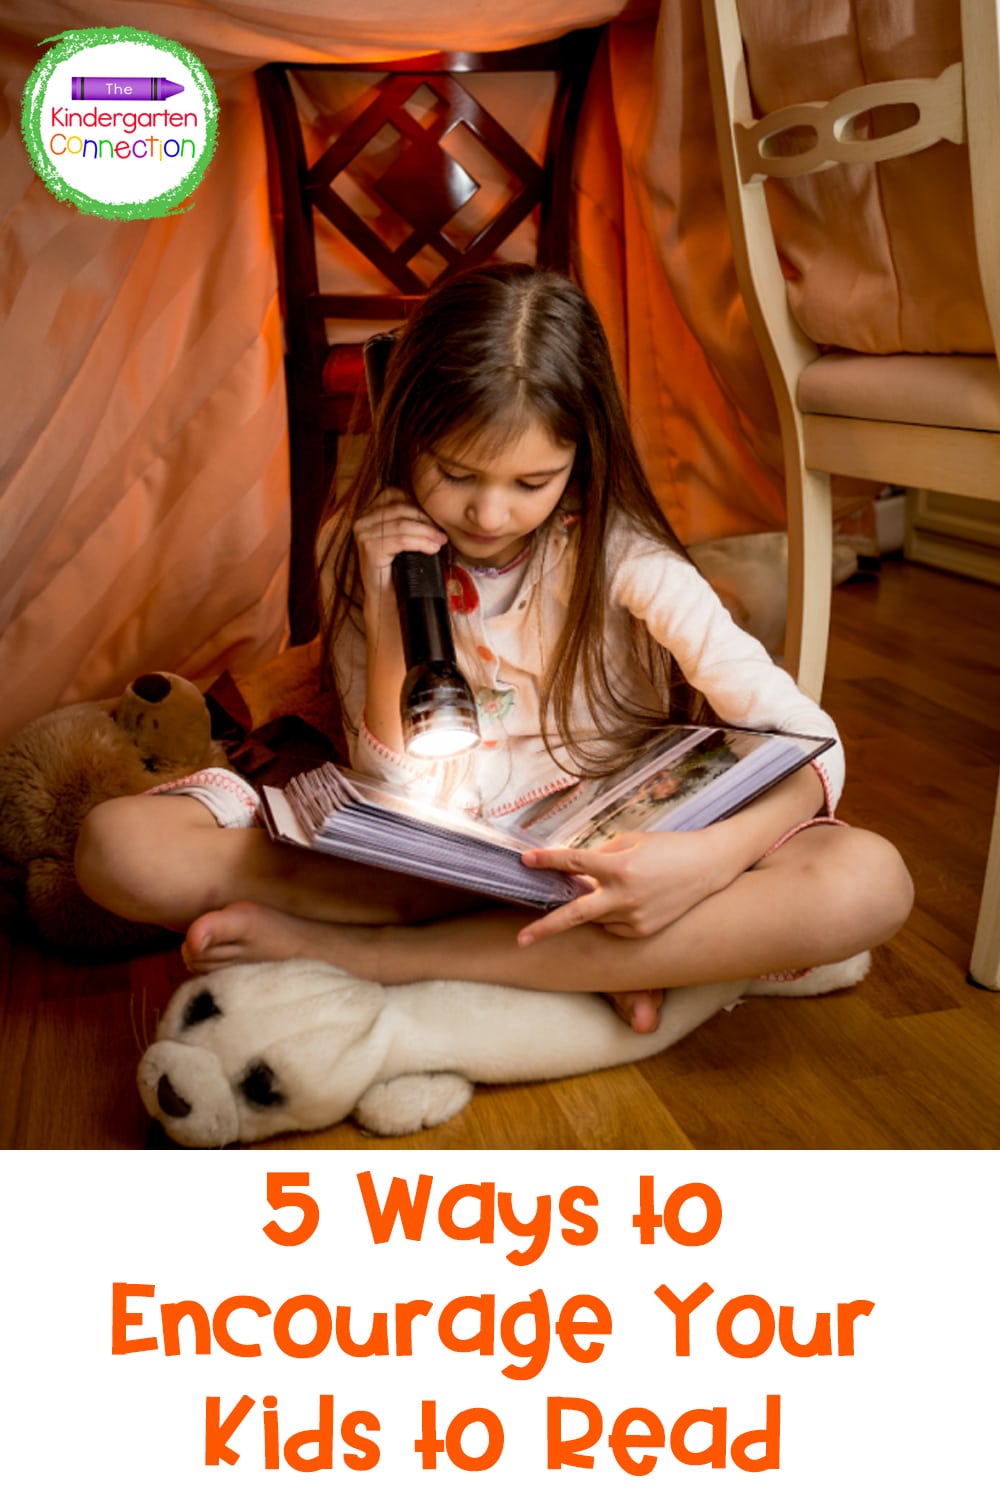 Let's be honest: some kids just don't like reading! Here are five ways to encourage reading, hopefully transforming a reluctant reader into a bookworm!